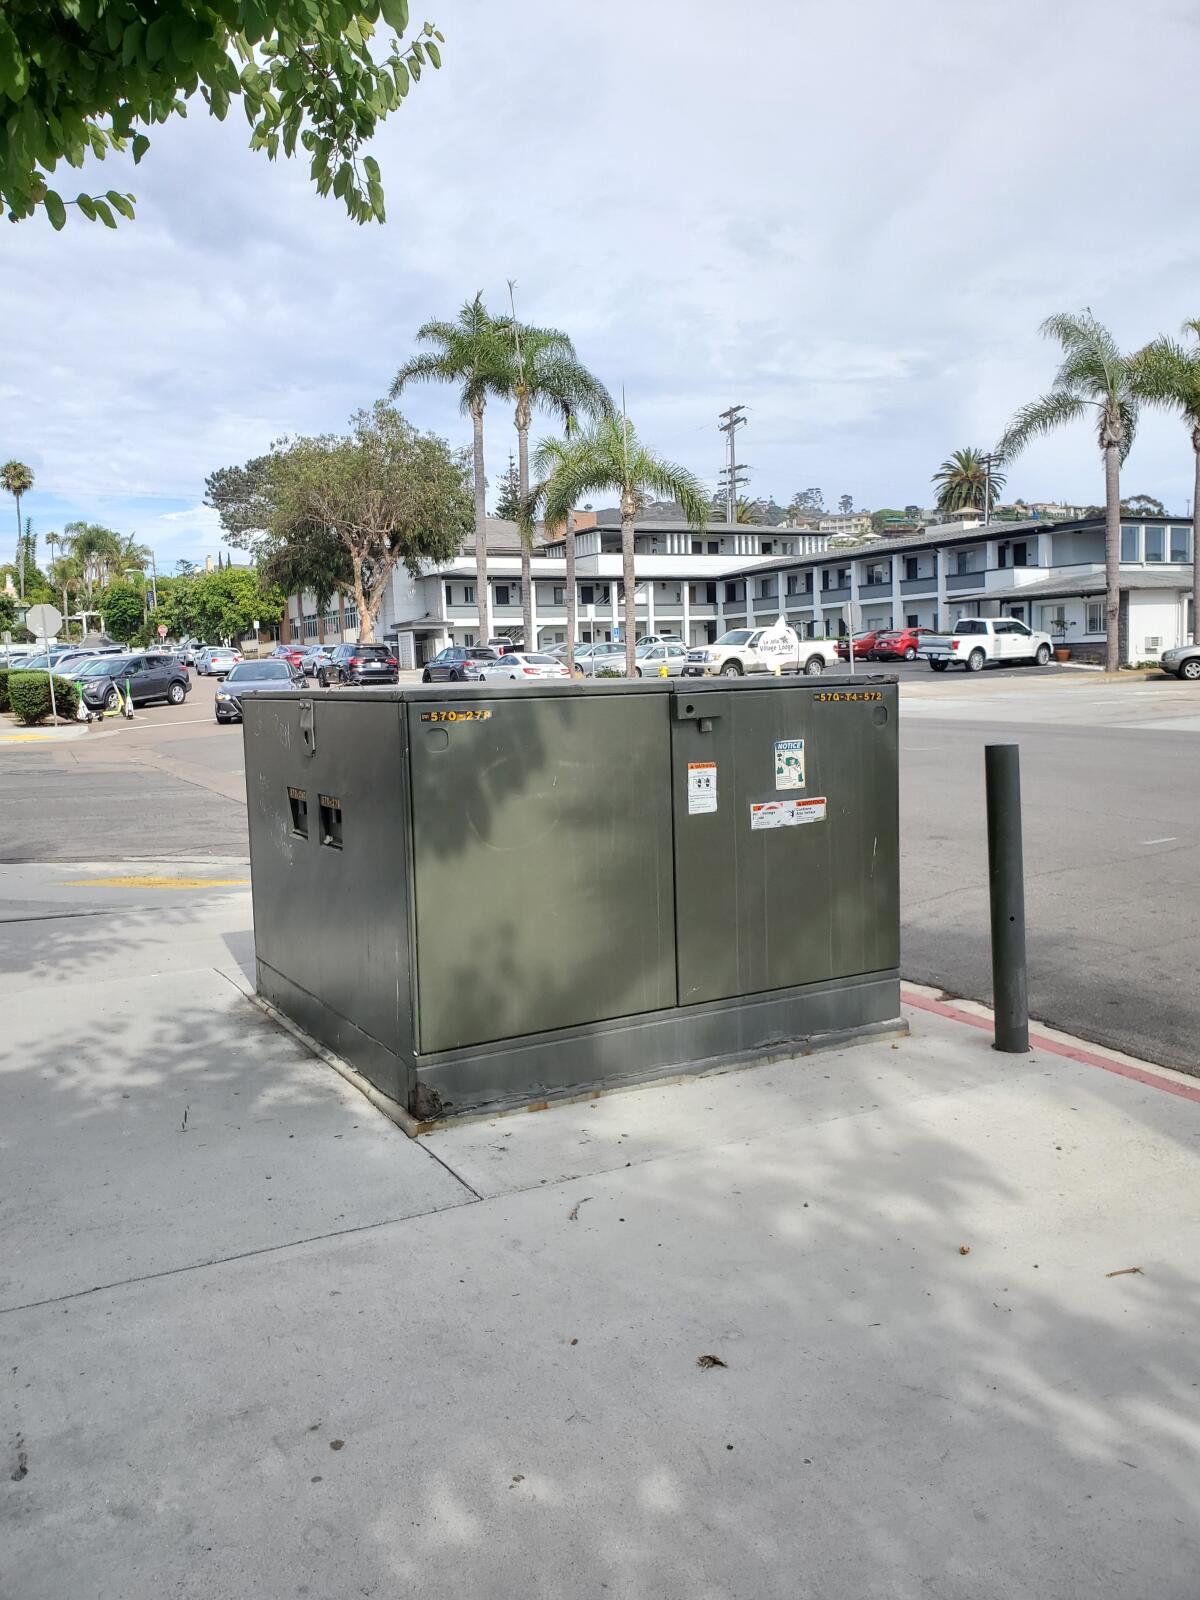 This utility box could be painted with directional material at the corner of Herschel Avenue and Silverado Street.